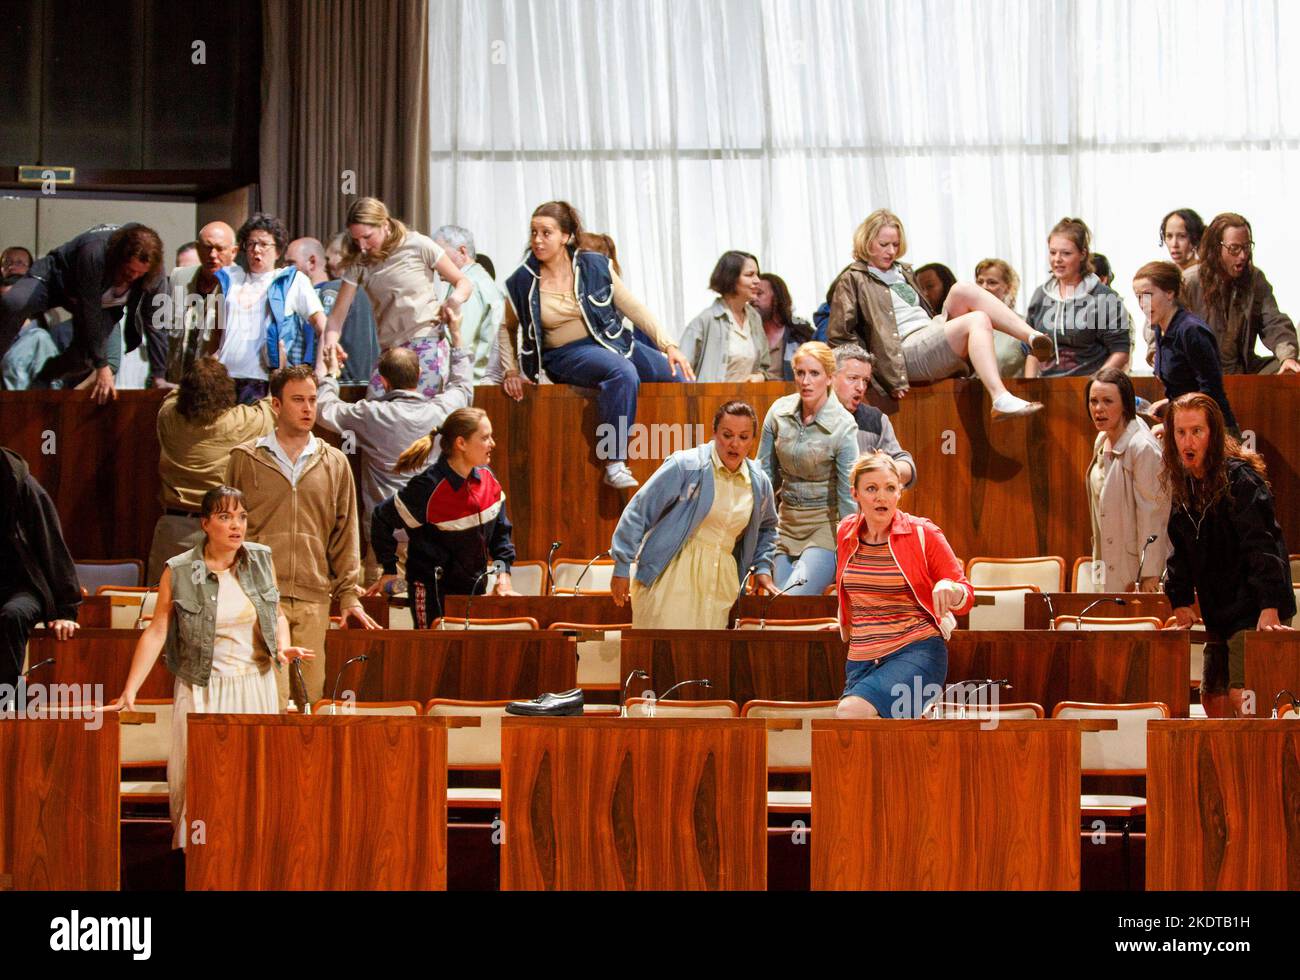 front centre right (in pink): Elizabeth Atherton (A Young Maiden) in MOSES UND ARON by Schoenberg at Welsh National Opera (WNO), Wales Millennium Centre, Cardiff, Wales  24/05/2014  conductor: Lother Koenigs  design: Anna Viebrock  lighting: Tim Mitchell  directors: Jossi Wieler & Sergio Morabito Stock Photo